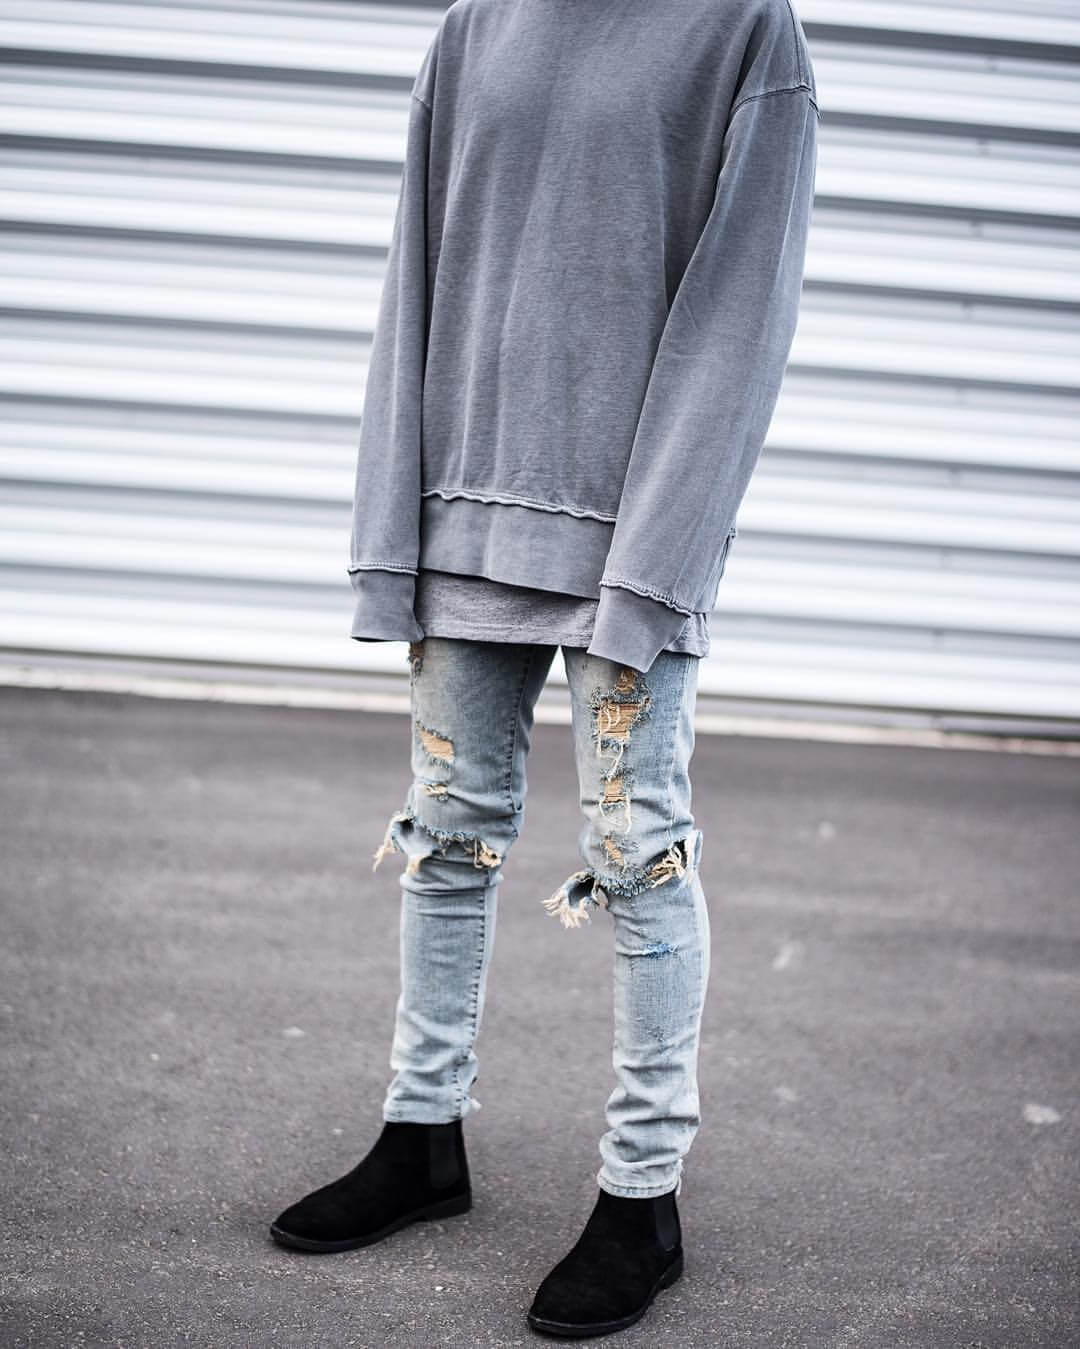 distressed-jeans-oversized-sweater-chelsea-boots